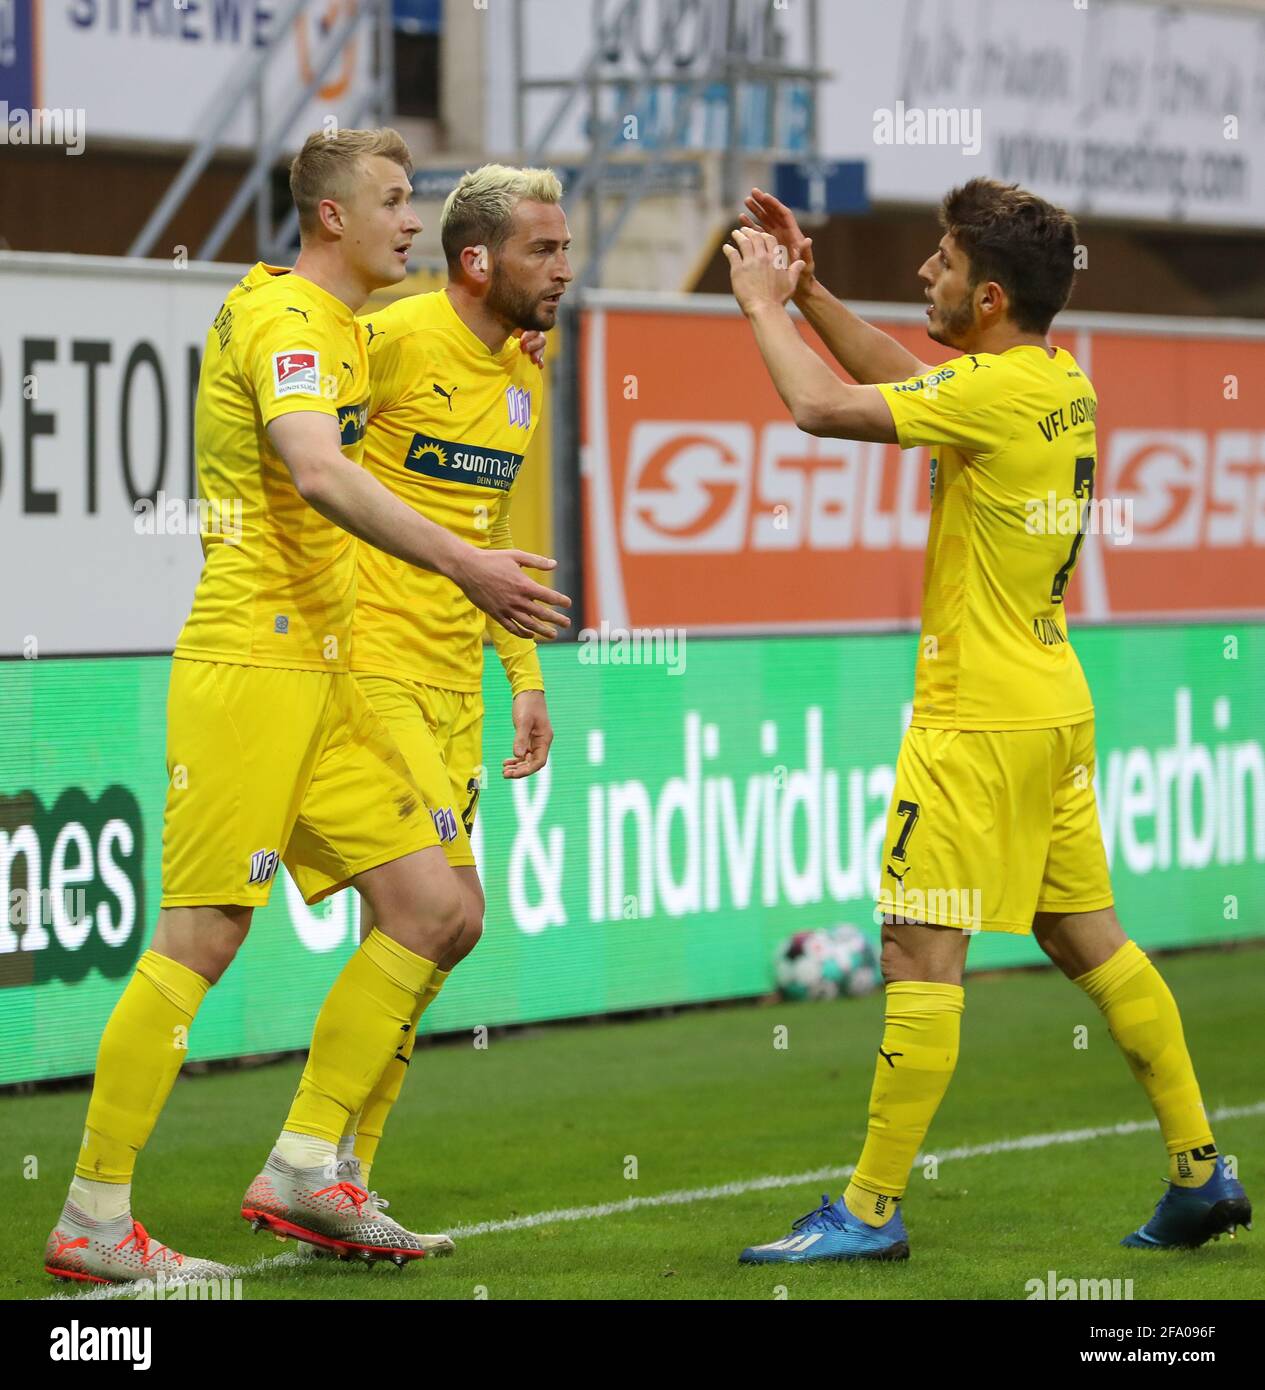 Paderborn, Germany. 21st Apr, 2021. Football: 2nd Bundesliga, SC Paderborn 07 - VfL Osnabrück, Matchday 30 at Benteler-Arena. Osnabrück's goal scorer Marc Heider (centre) celebrates his goal to make it 1:2 with Lukas Gugganig (l-r) and Bashkim Ajdini. Credit: Friso Gentsch/dpa - IMPORTANT NOTE: In accordance with the regulations of the DFL Deutsche Fußball Liga and/or the DFB Deutscher Fußball-Bund, it is prohibited to use or have used photographs taken in the stadium and/or of the match in the form of sequence pictures and/or video-like photo series./dpa/Alamy Live News Stock Photo